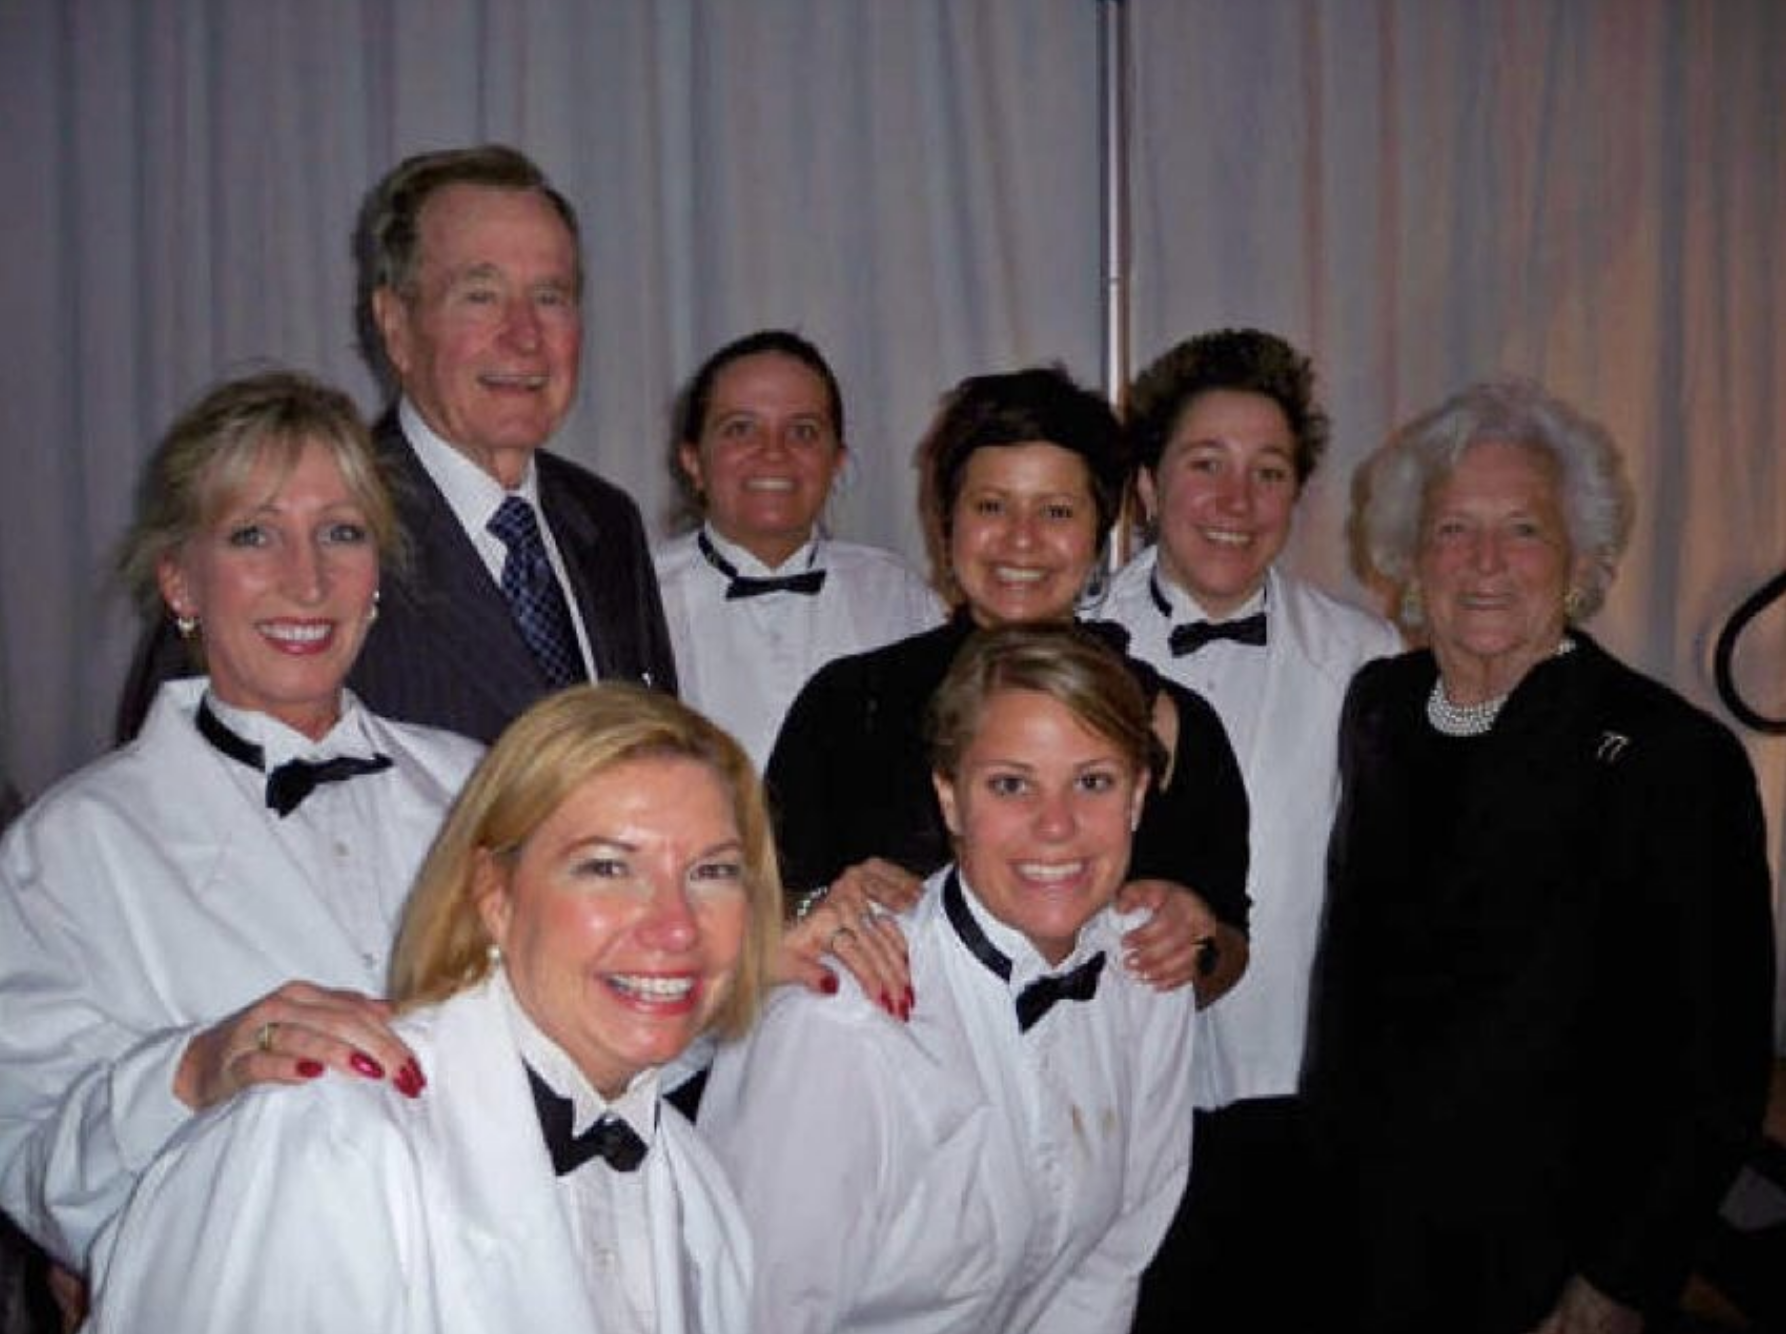 Former President George H. W. Bush with TASTE Catering team